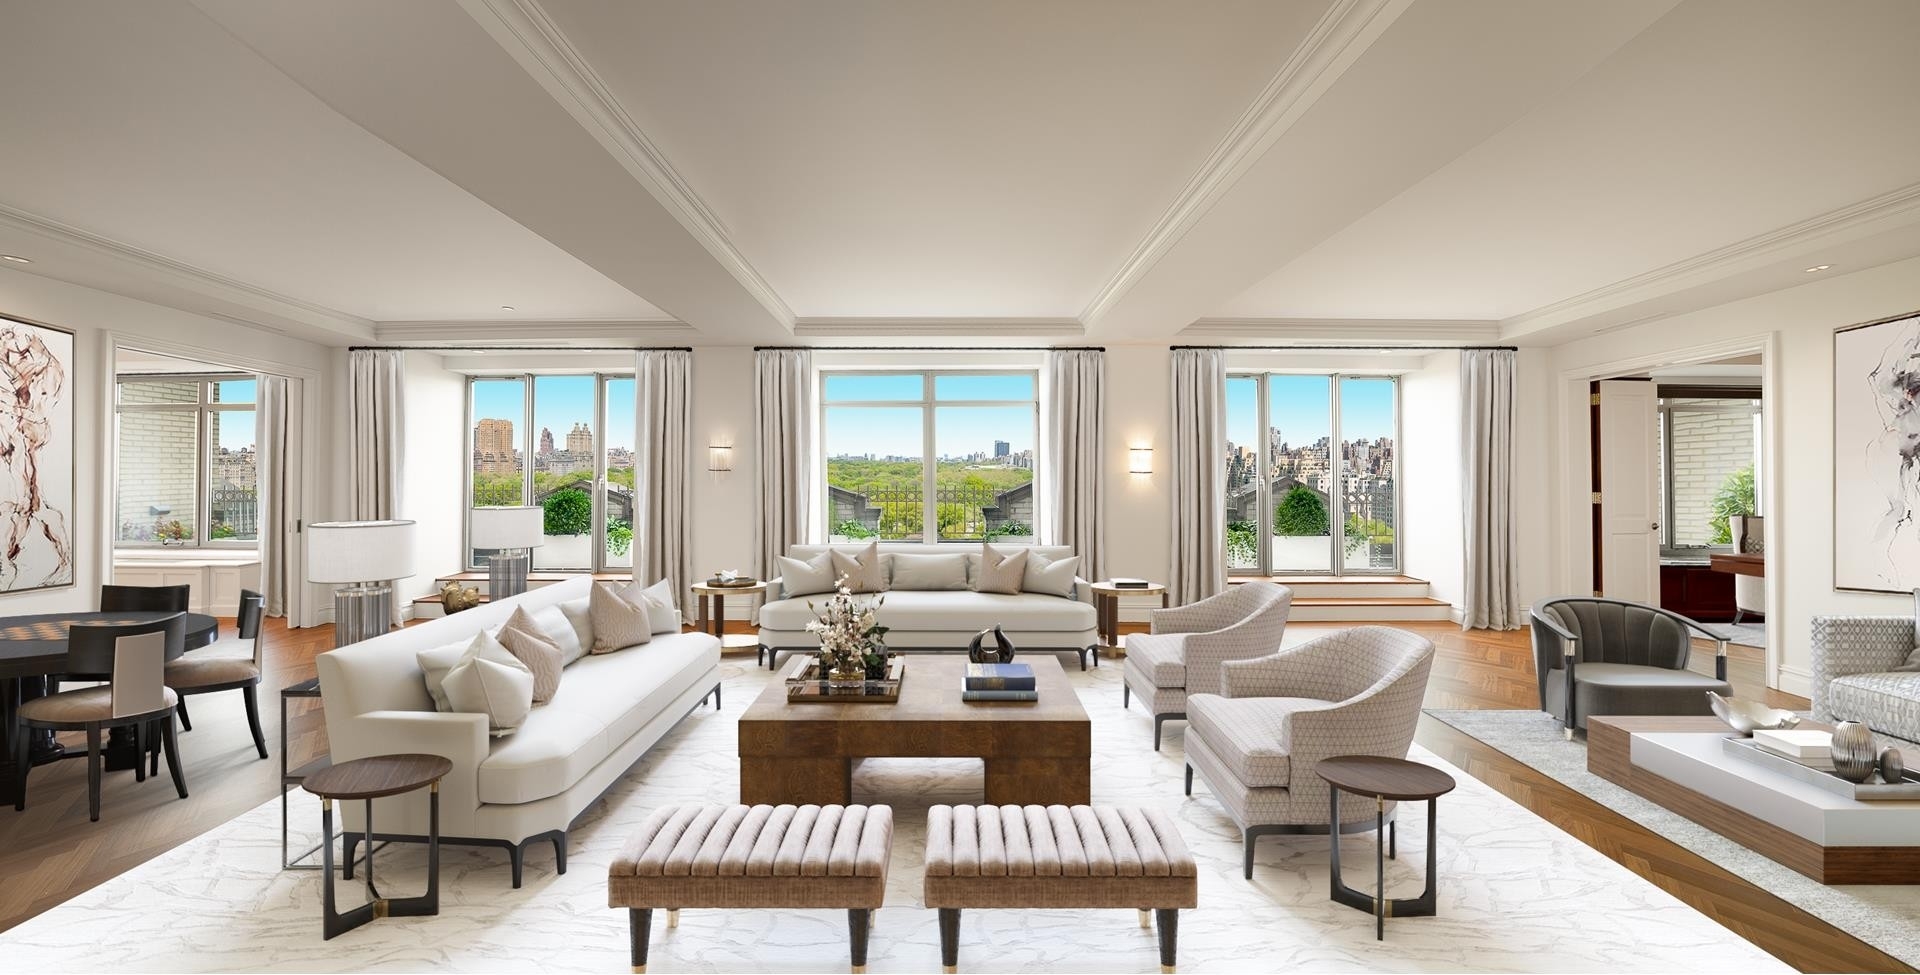 Condominium for Sale at Residences At Ritz-Carlton, 50 CENTRAL PARK S, PH23 Central Park South, New York, New York 10019